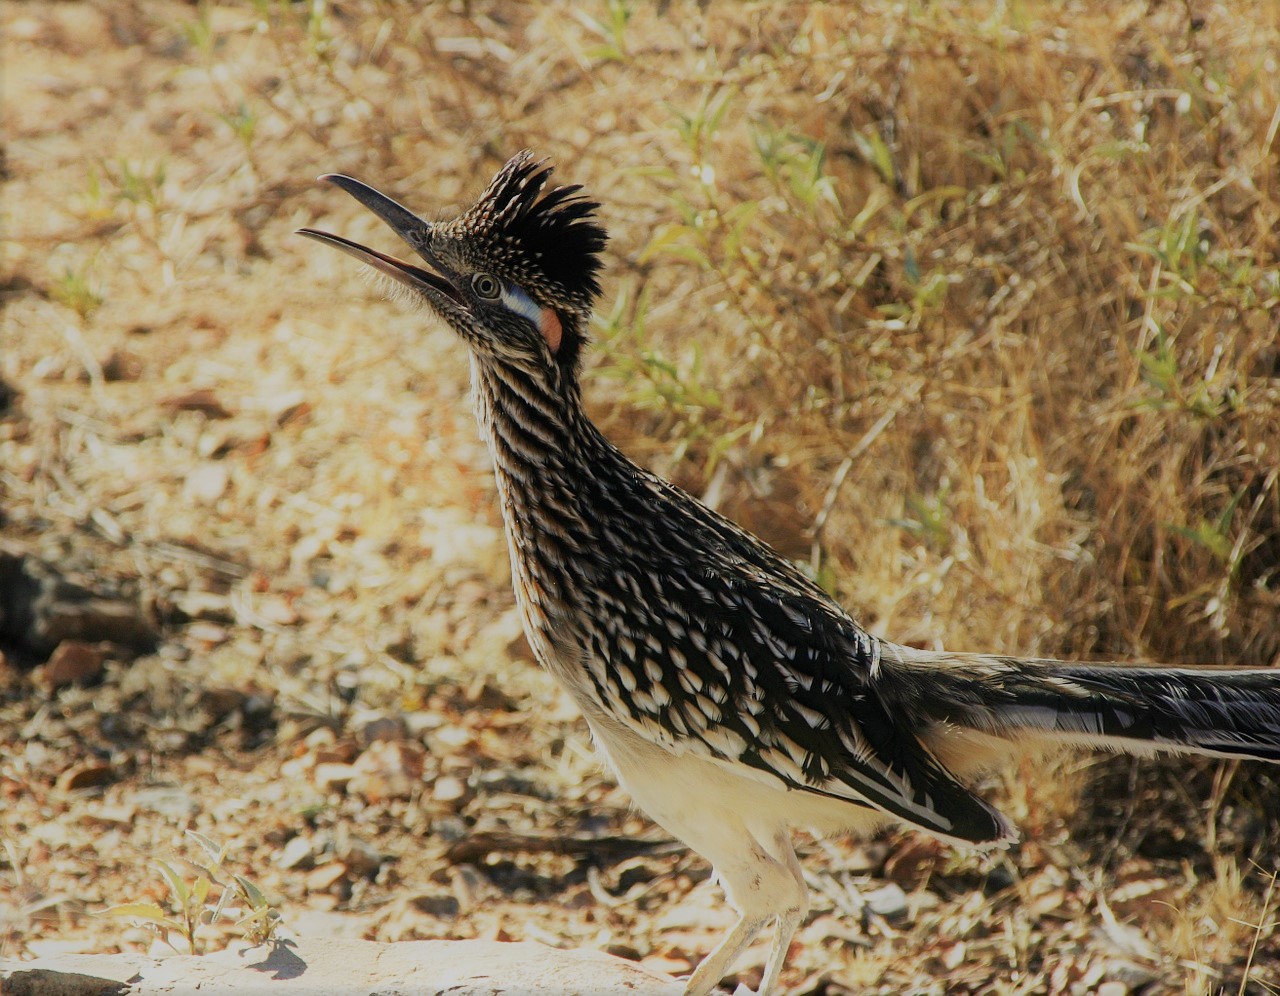 A Greater Roadrunner brown and white bird, standing in a desert